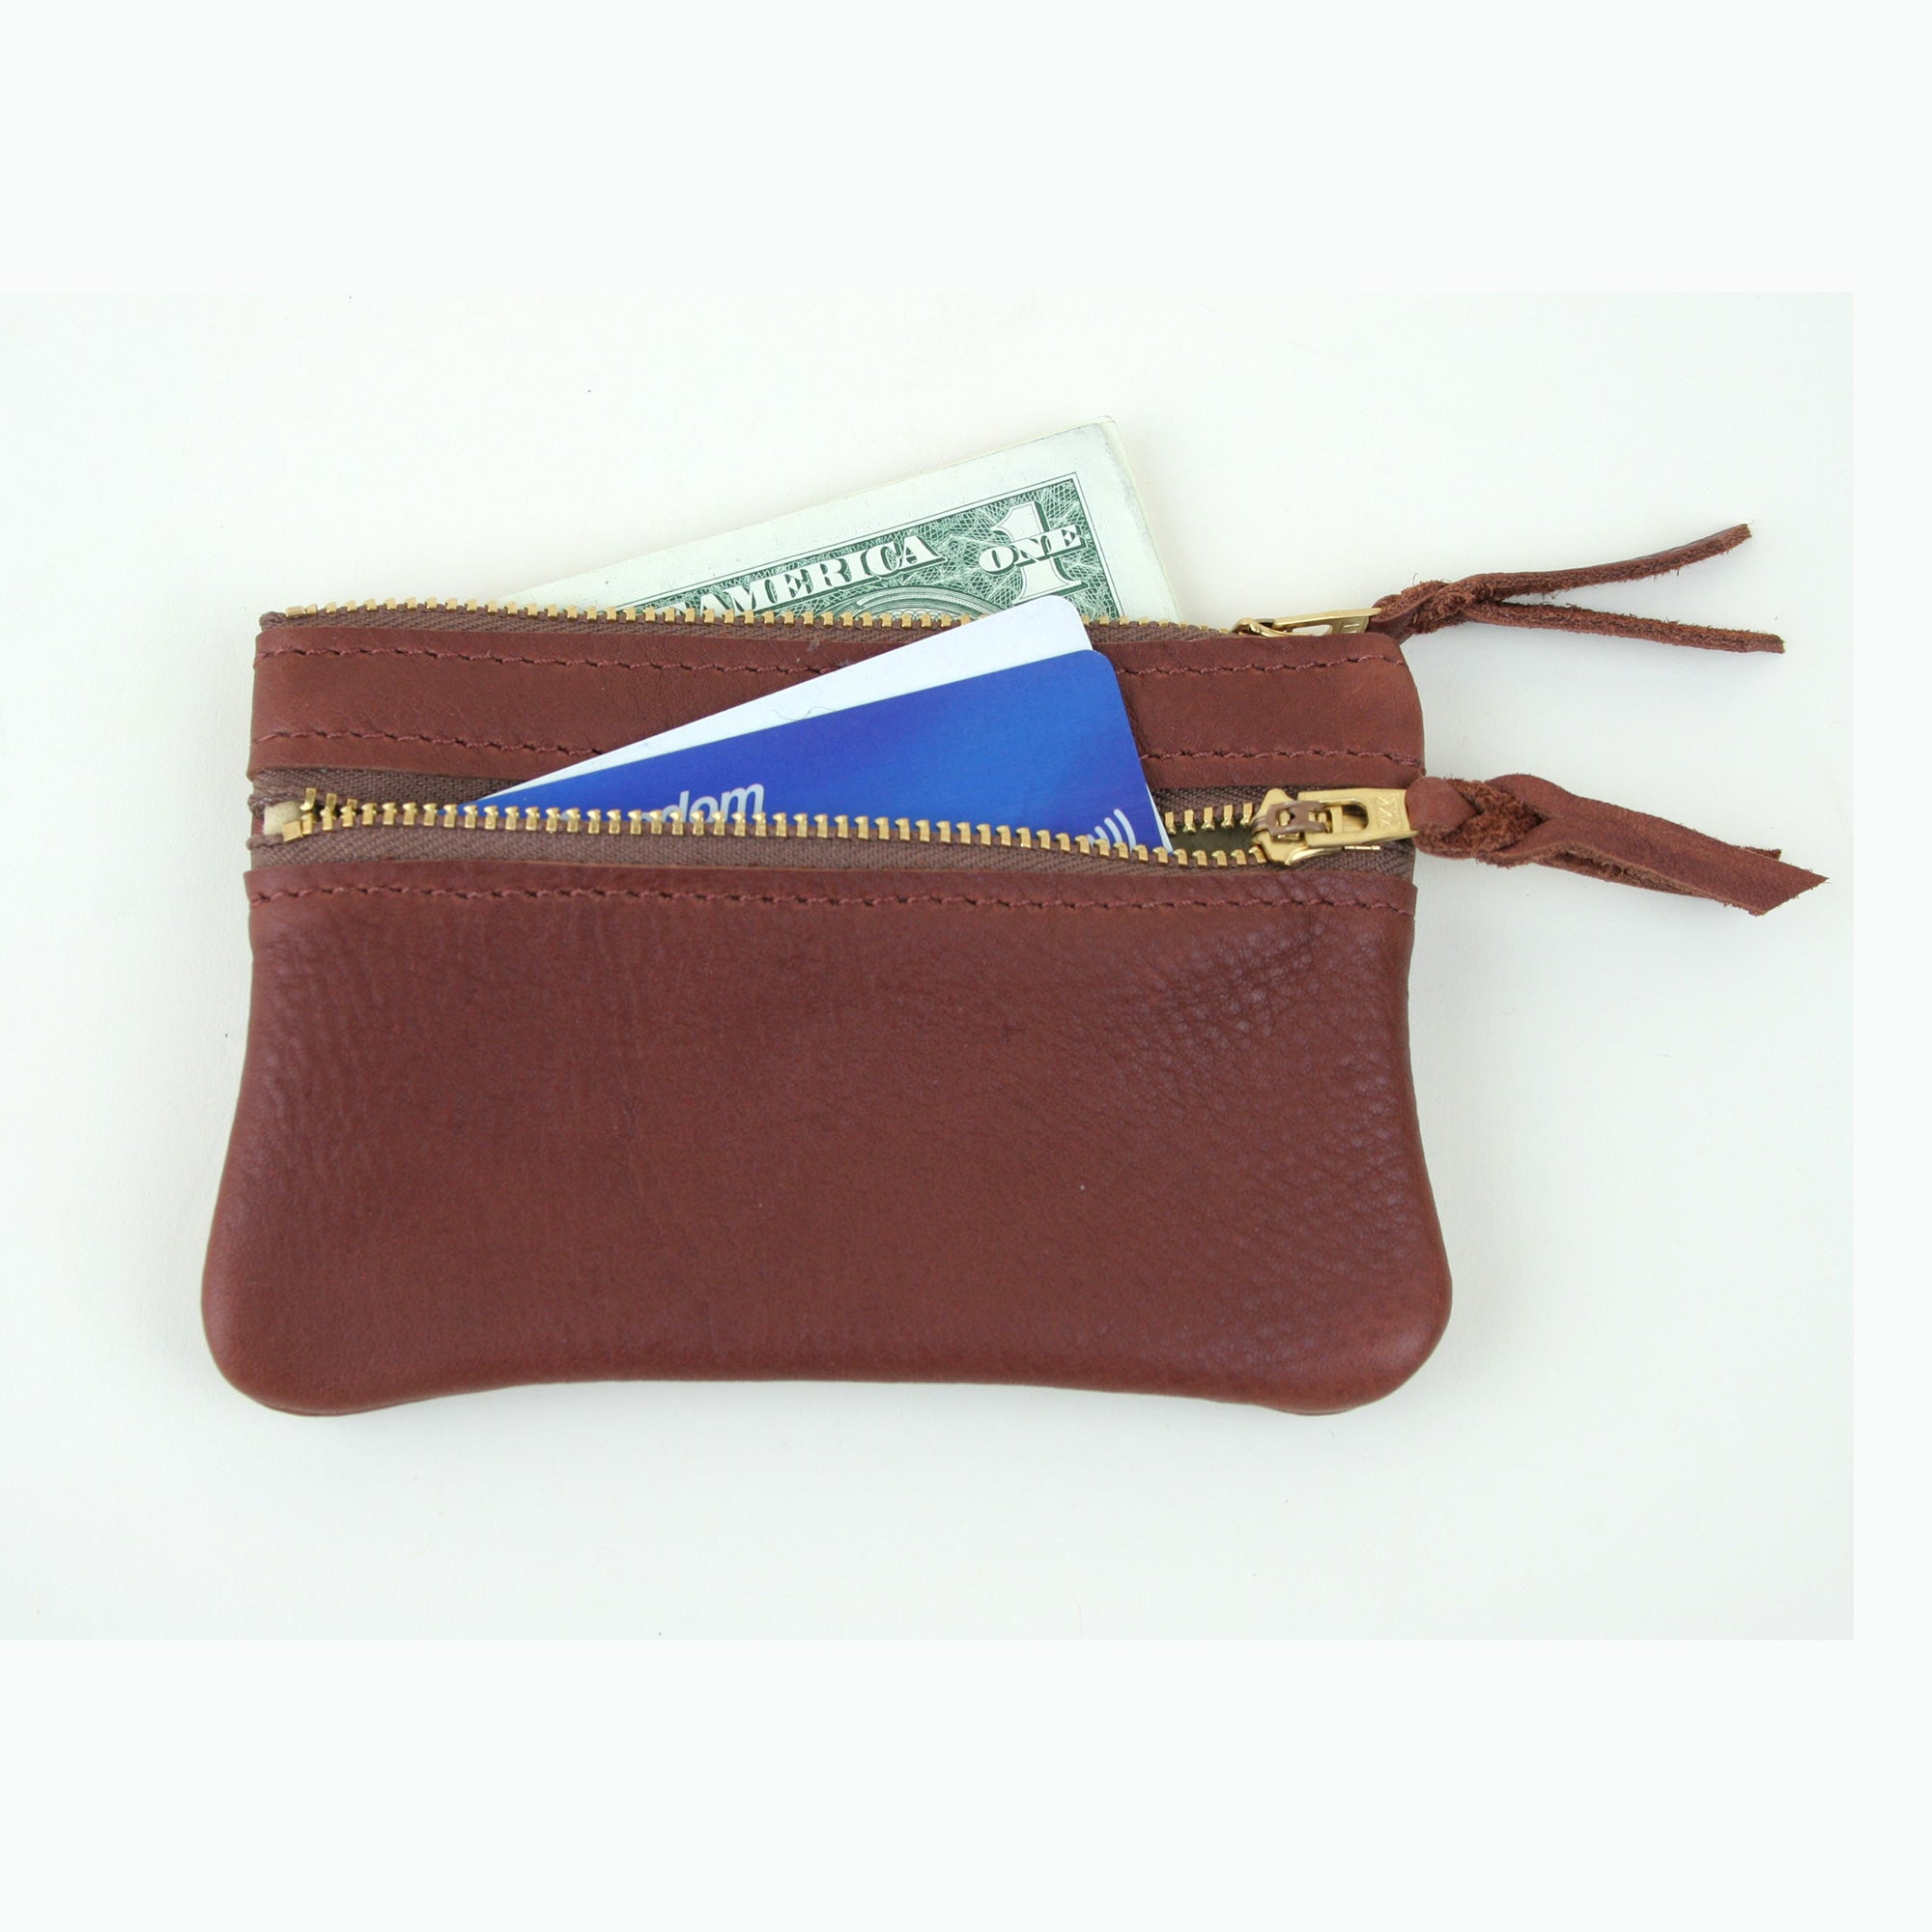 Leather tan coin purse 4 zippered pockets change purse leather coin bag  leather coin pouch leather coin holder